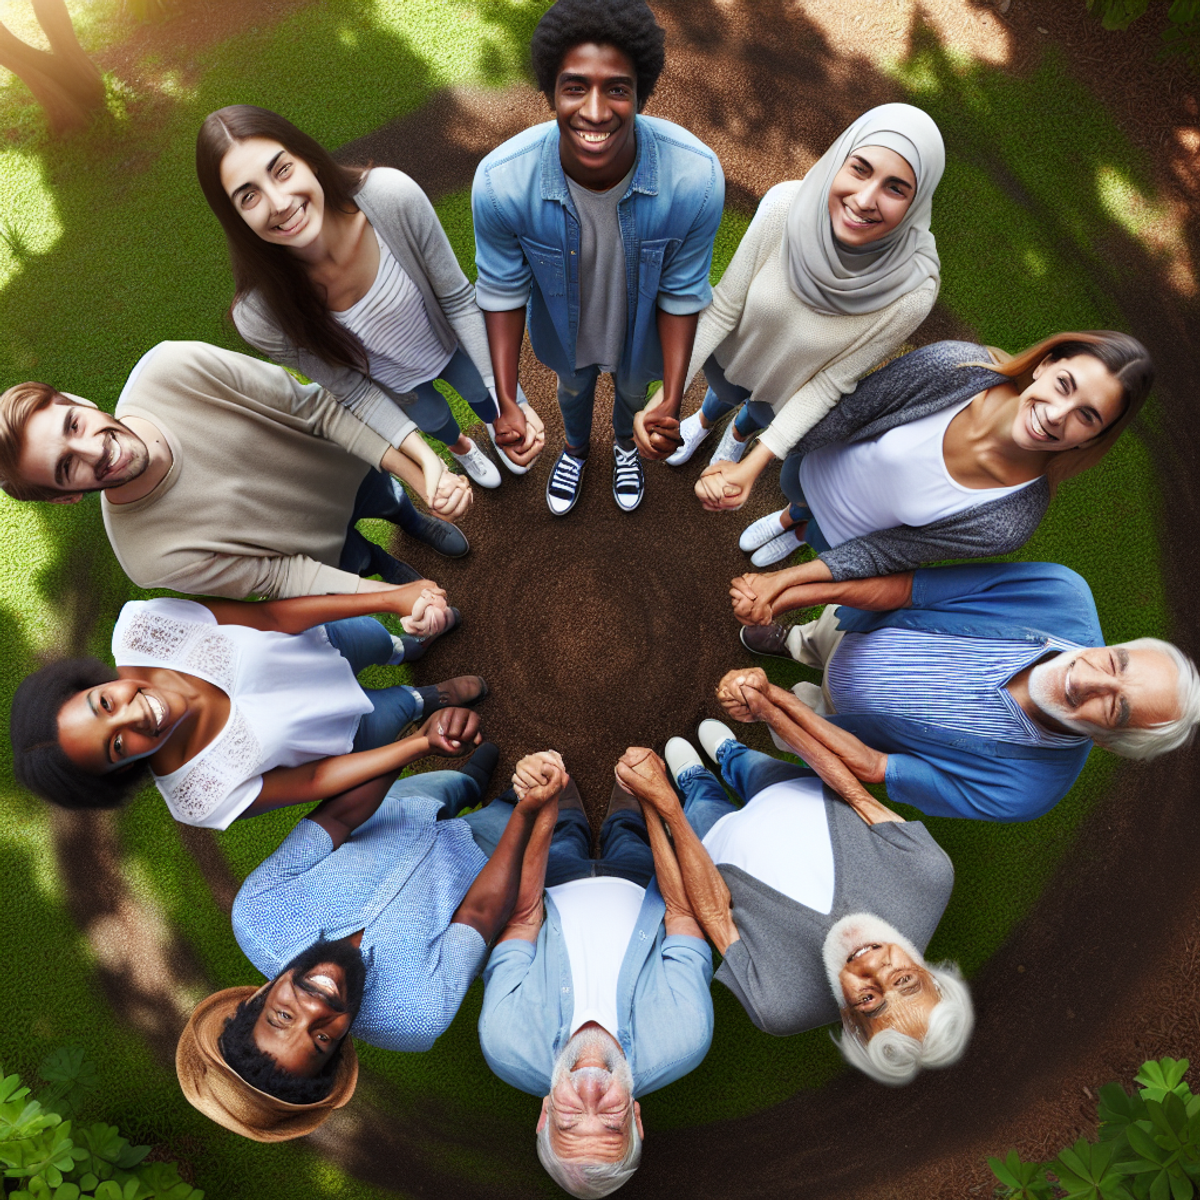 A diverse group of people holding hands in a circle outdoors.